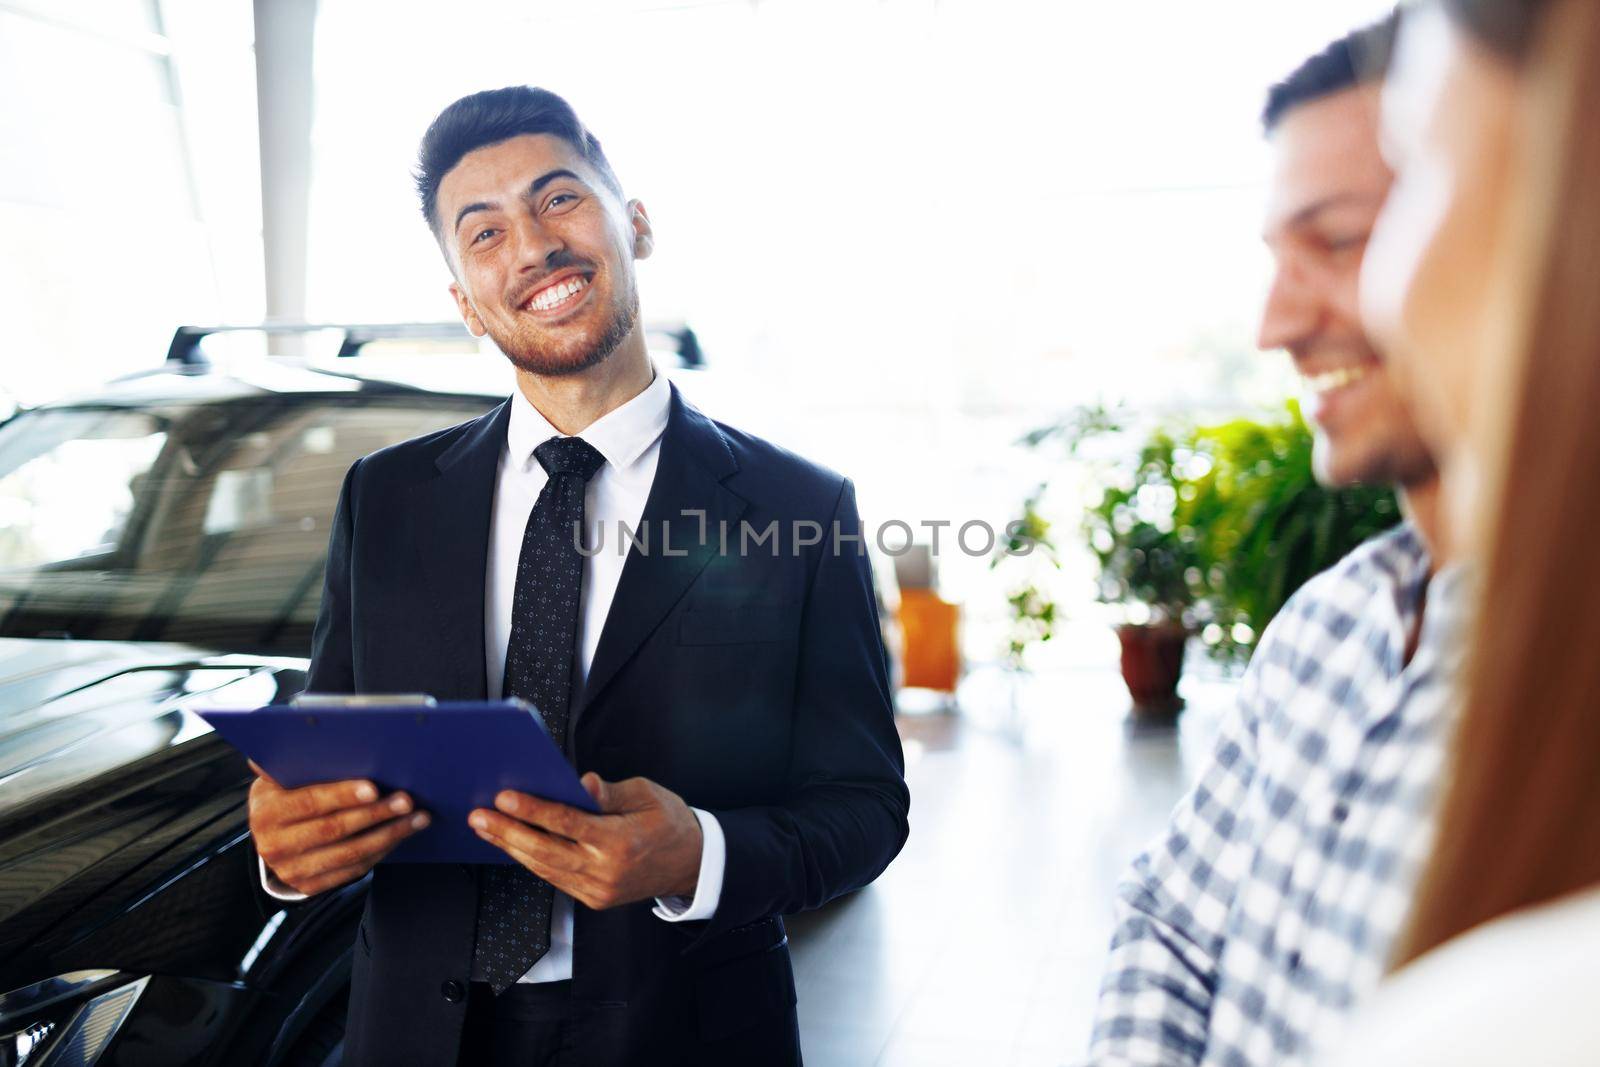 Man car salesman telling about the features of the new car to the couple at dealership